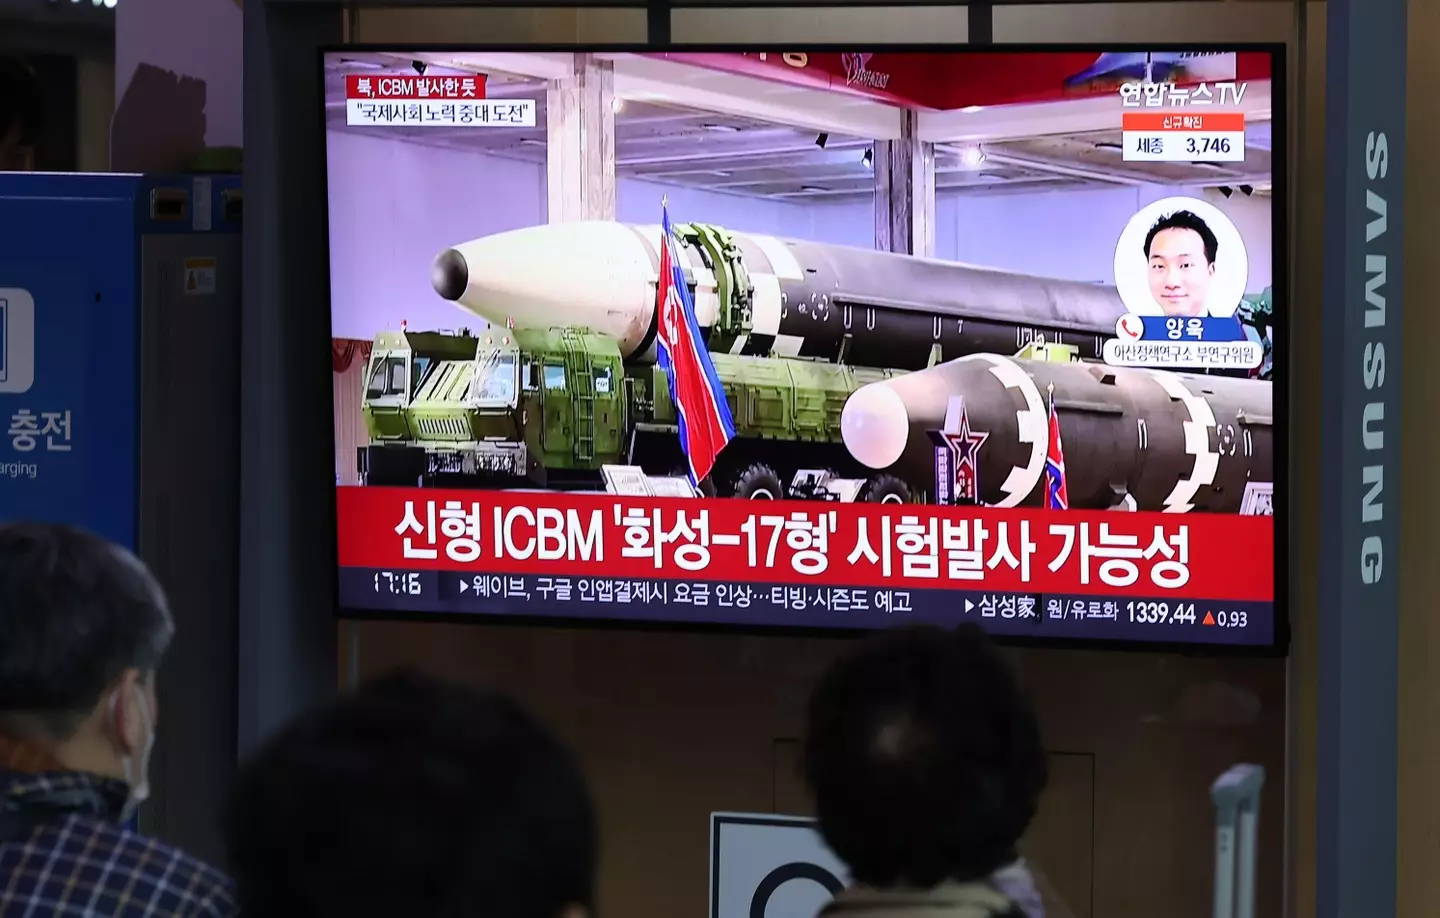 South Korean news reports missile launch.